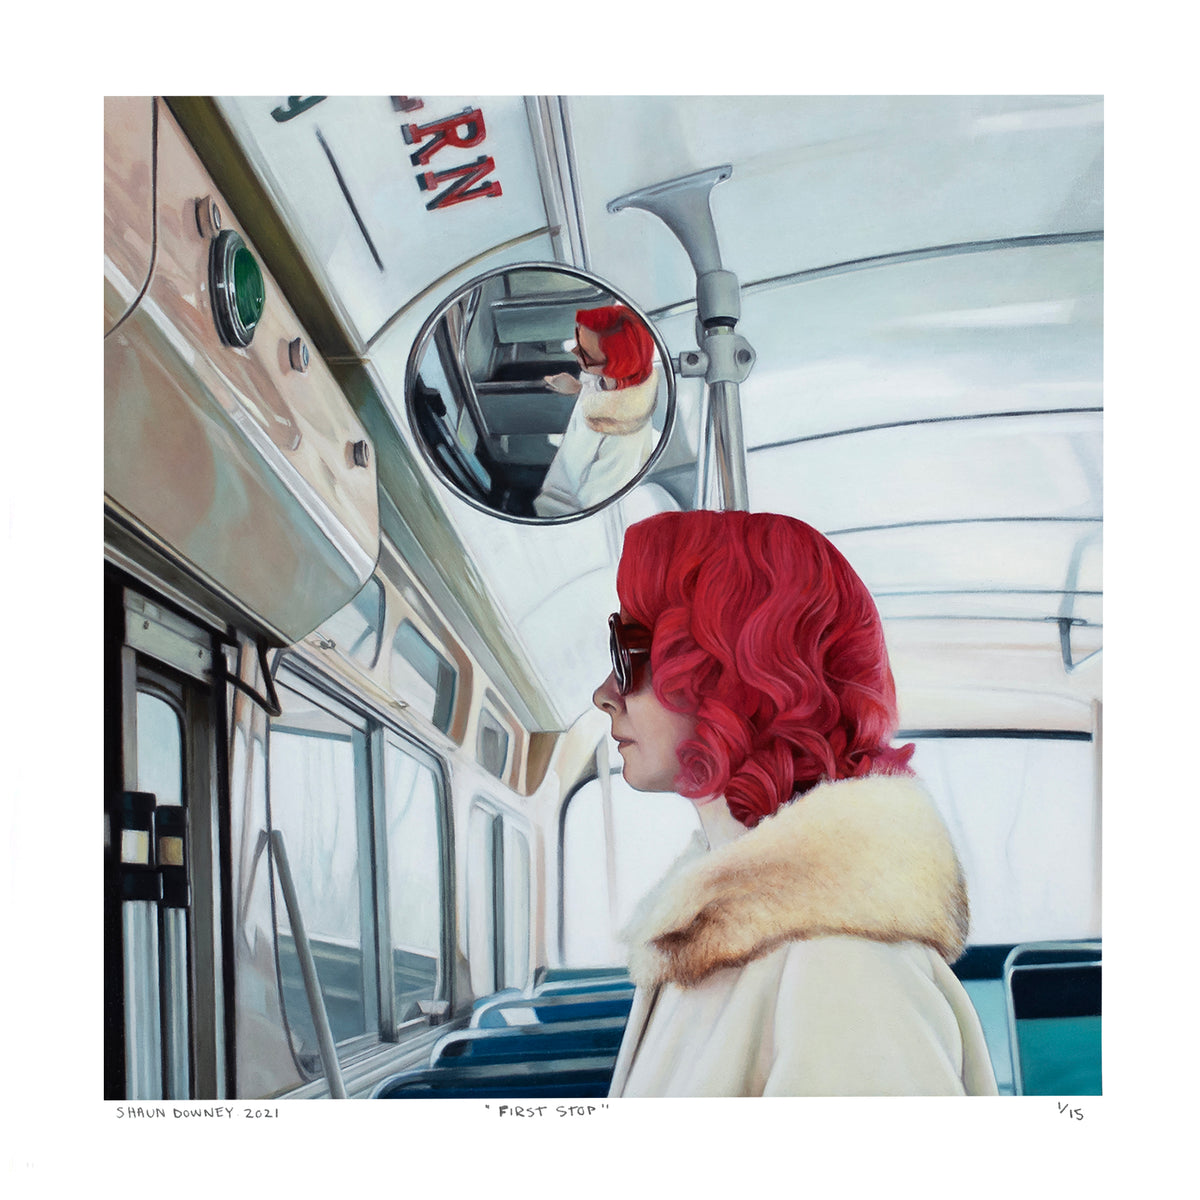 Shaun Downey &quot;First Stop&quot; - Archival Print, Limited Edition of 15 - 12 x 12&quot;